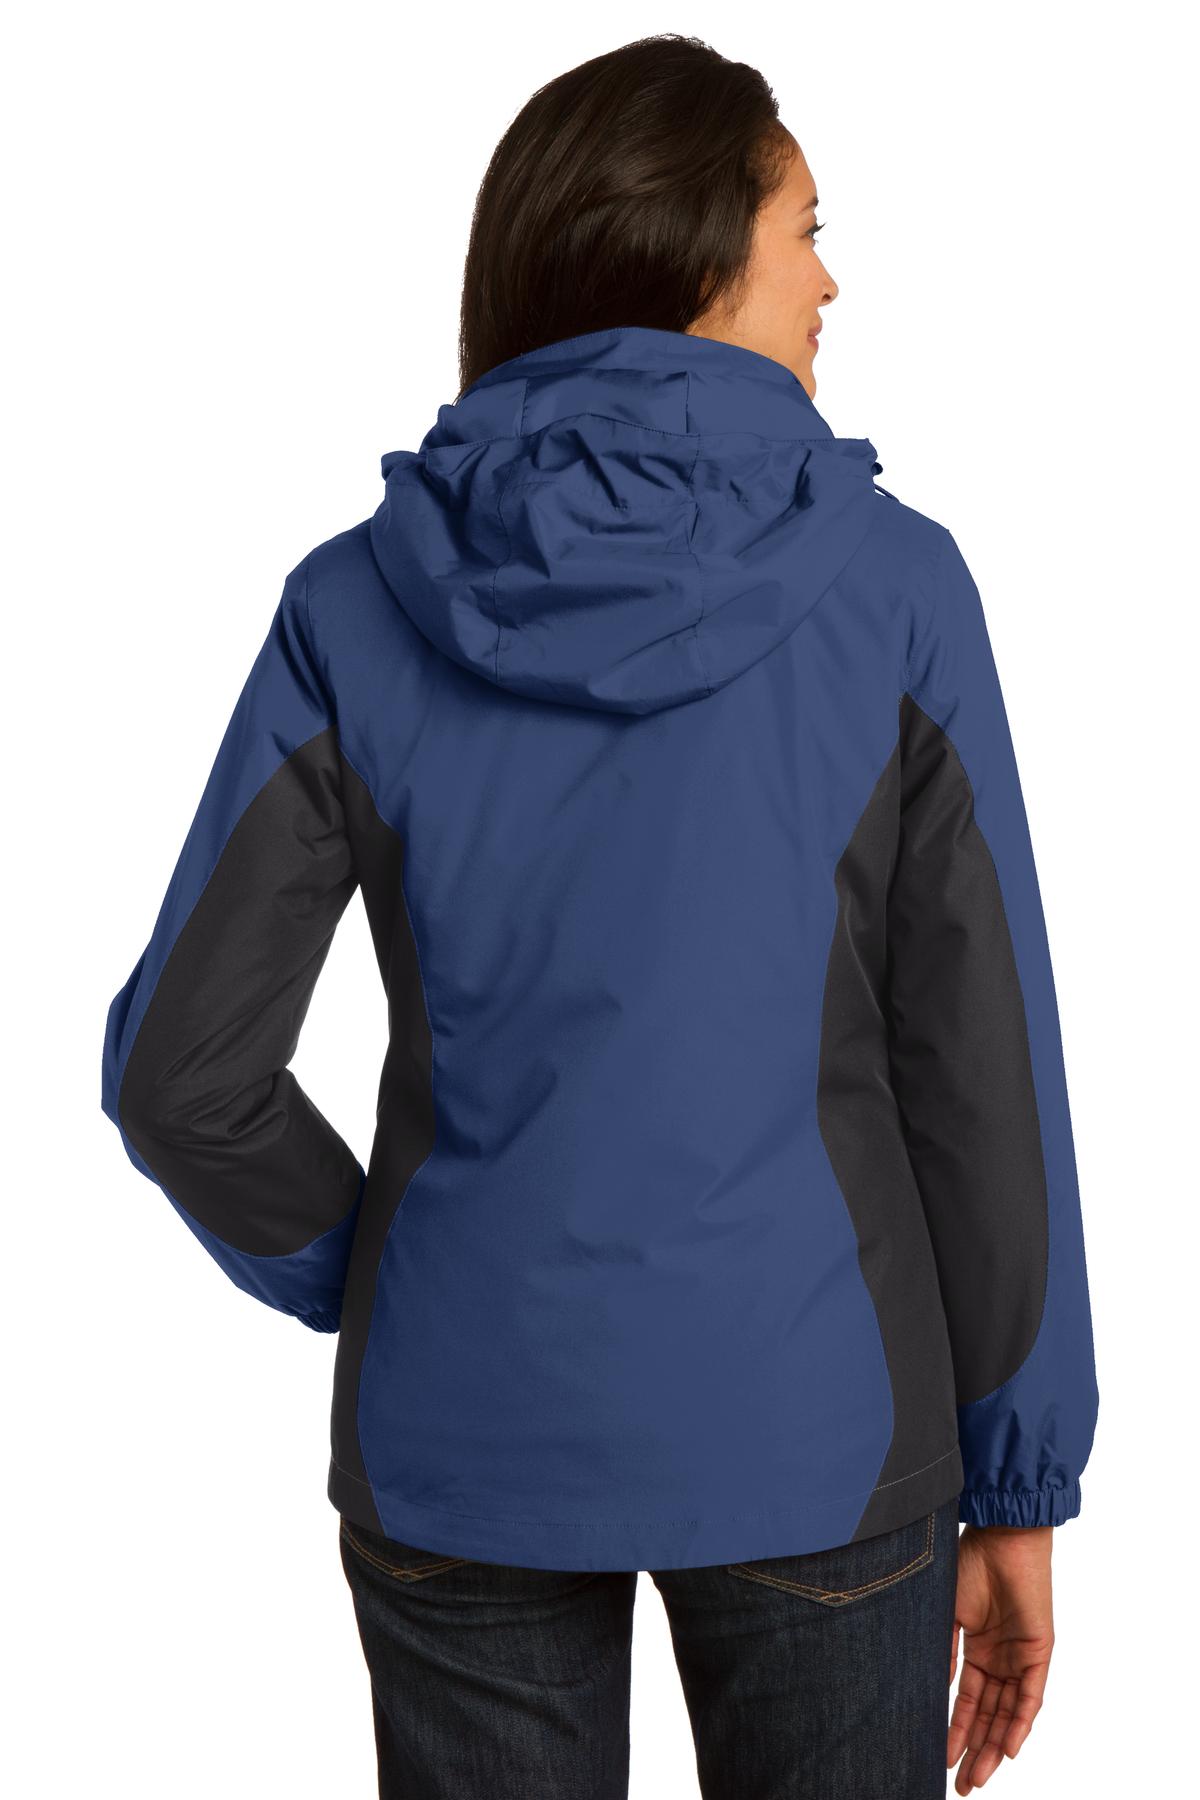 Port Authority Ladies Colorblock 3 in 1 Jacket-S (Admiral Blue/ Black/ Magnet Grey) - image 2 of 5